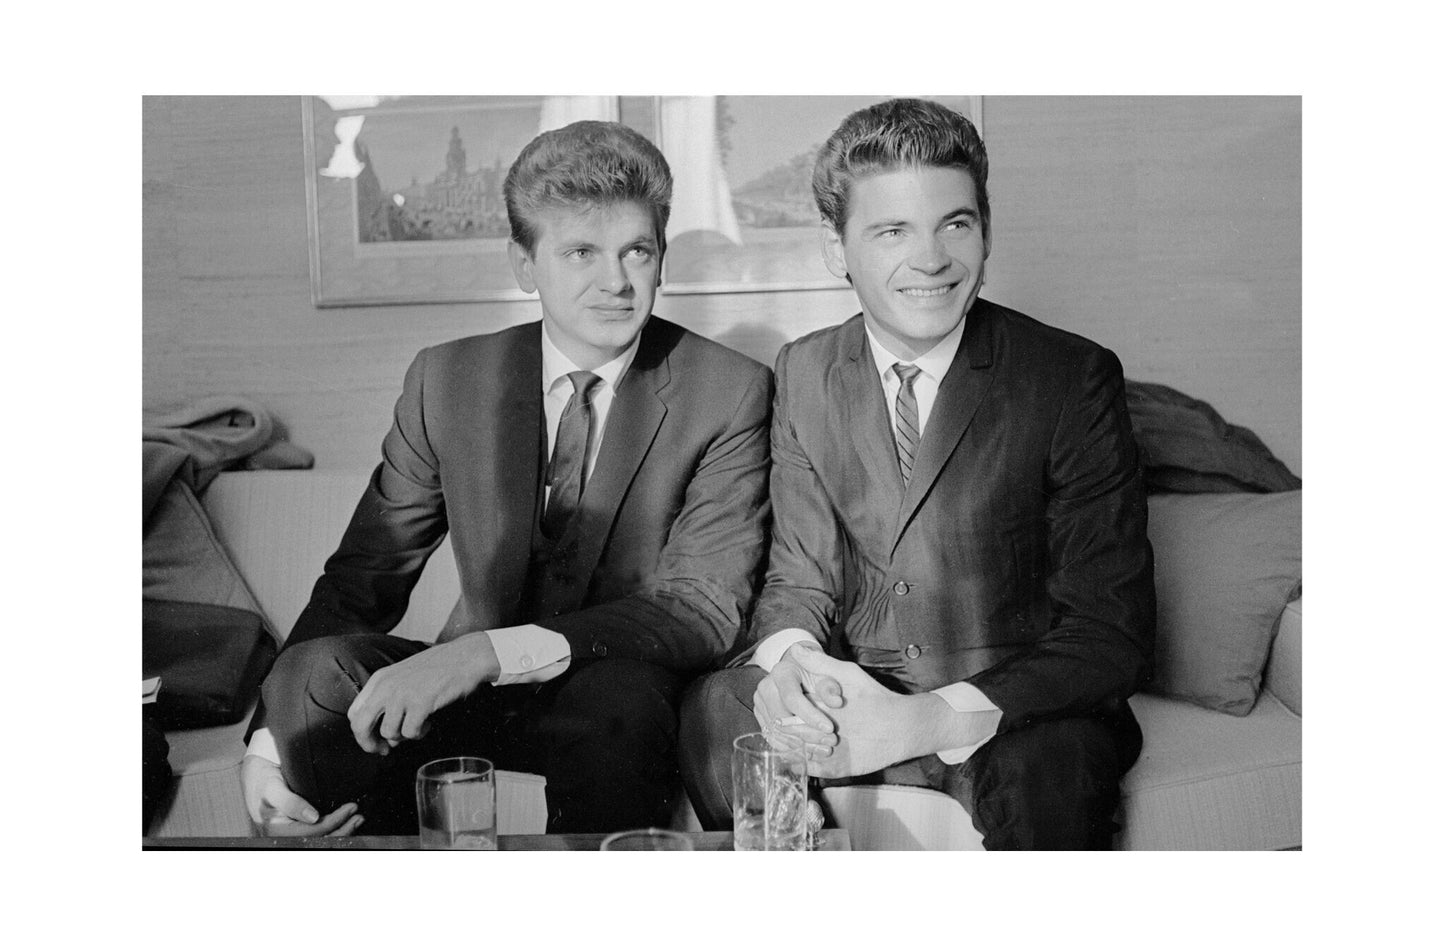 The Everly Brothers - At their Hotel Suite in London, England, 1963 Print 2